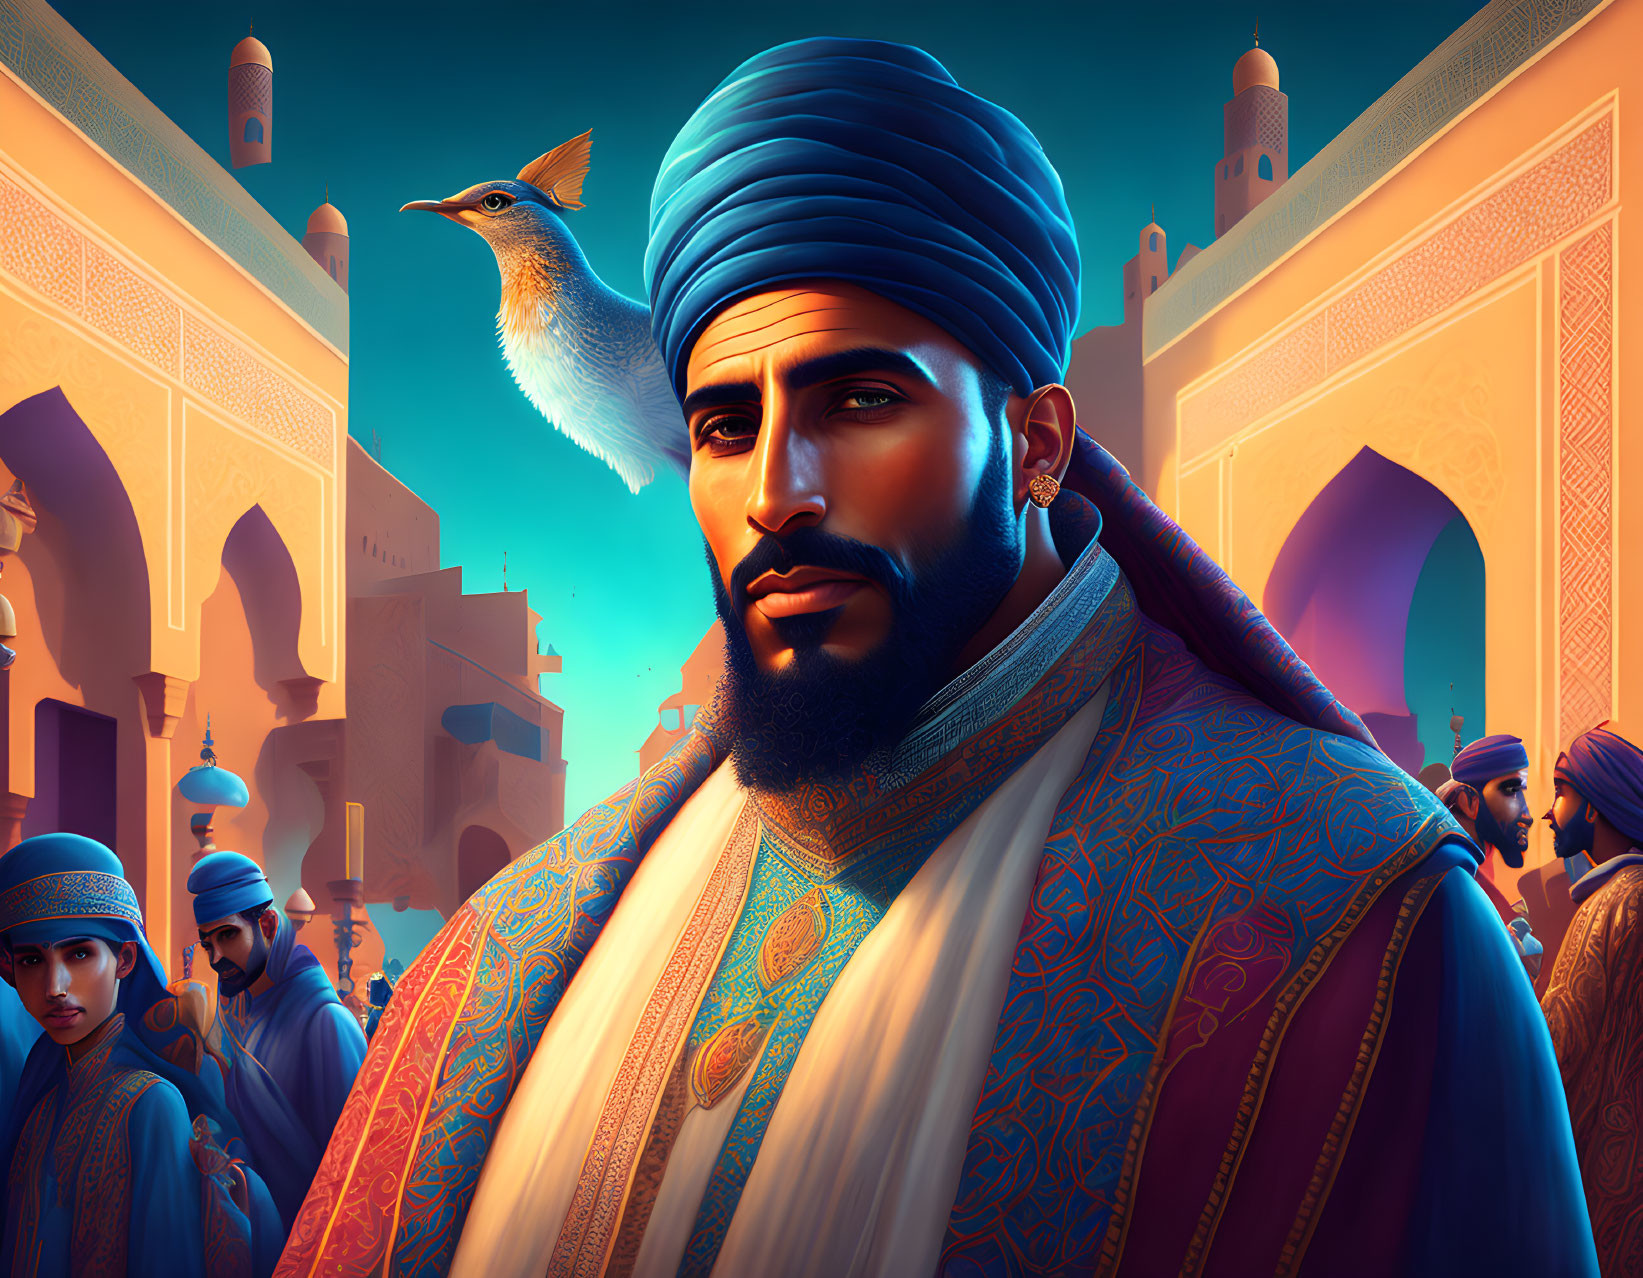 Man in regal attire with turban in Middle Eastern market with bird in vivid illustration